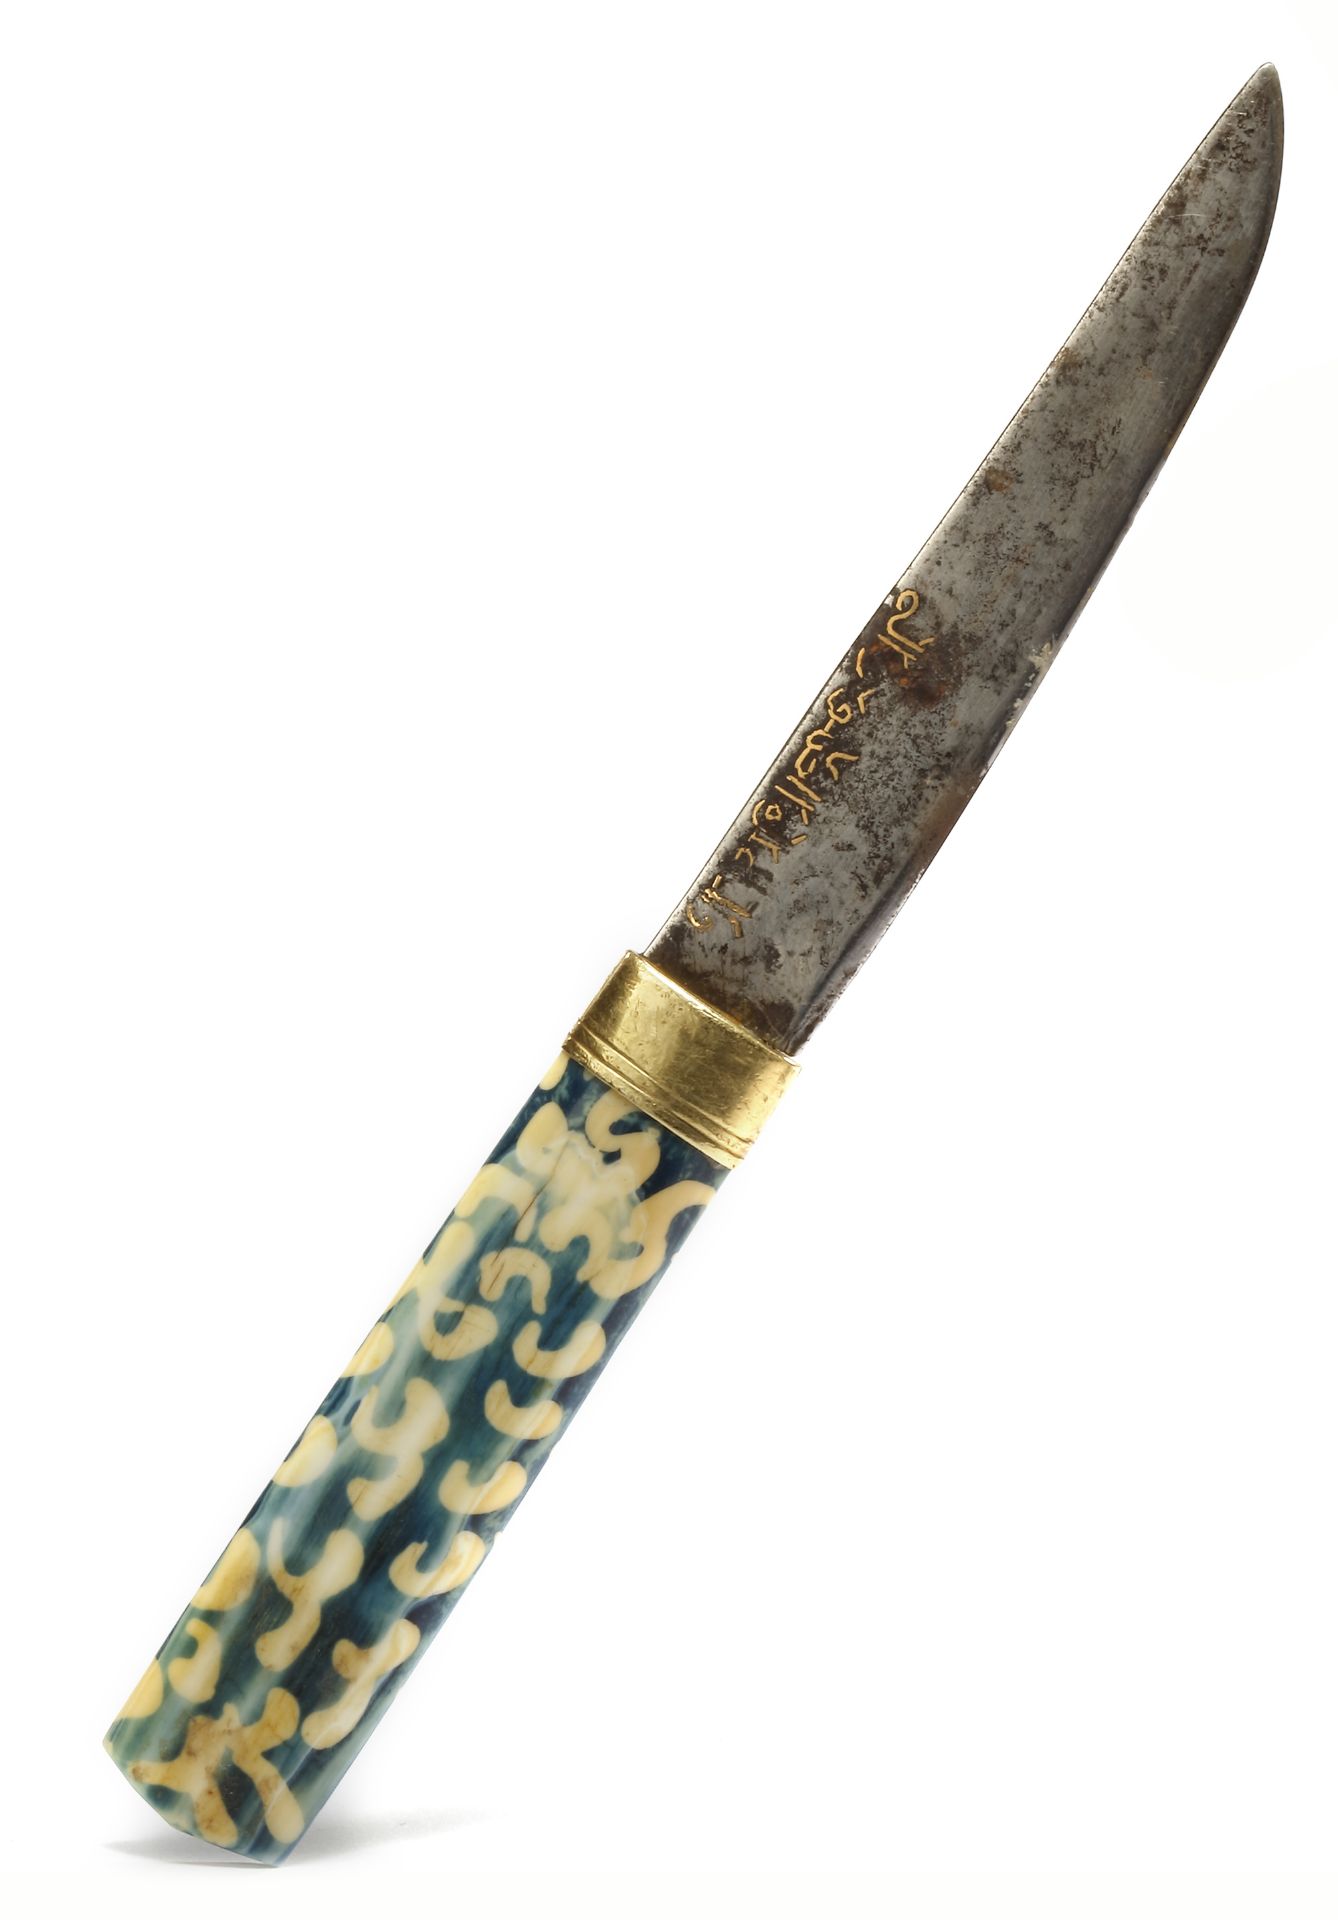 A SMALL INSCRIBED KNIFE, LATE TIMURID, 15TH-16TH CENTURY - Image 2 of 12